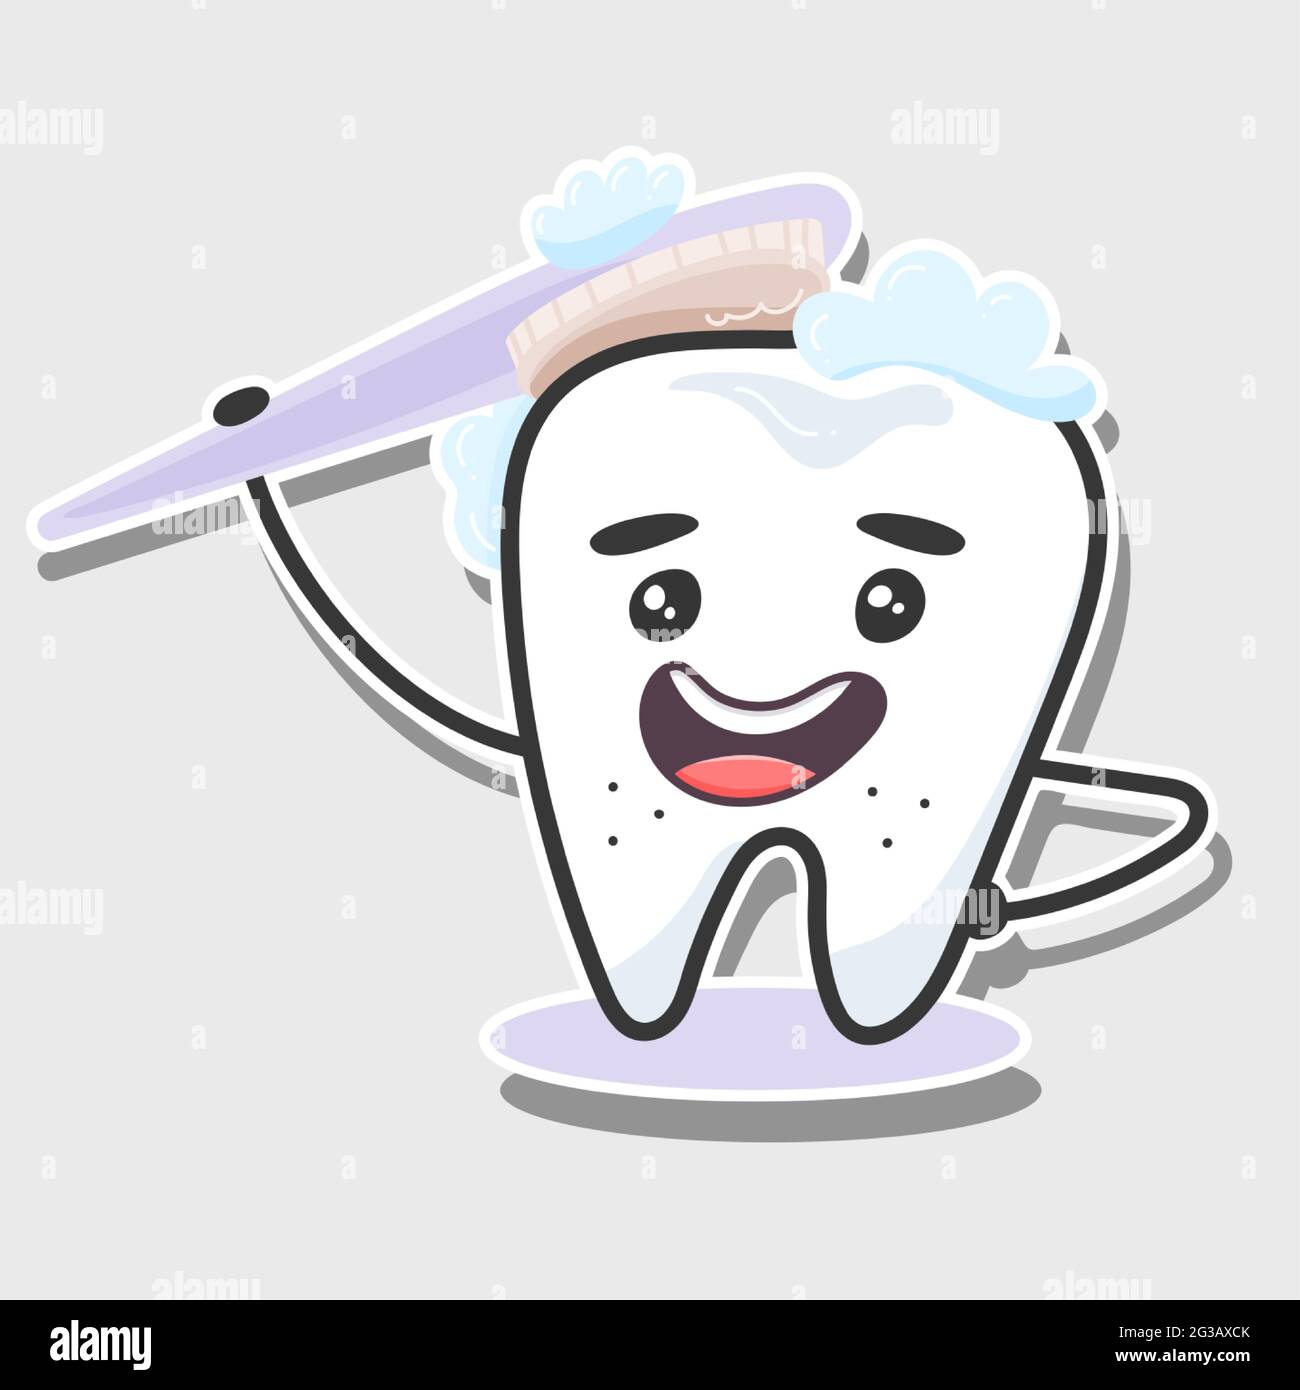 dental art. Tooth and toothbrush sticker. oral hygiene concept Stock Vector